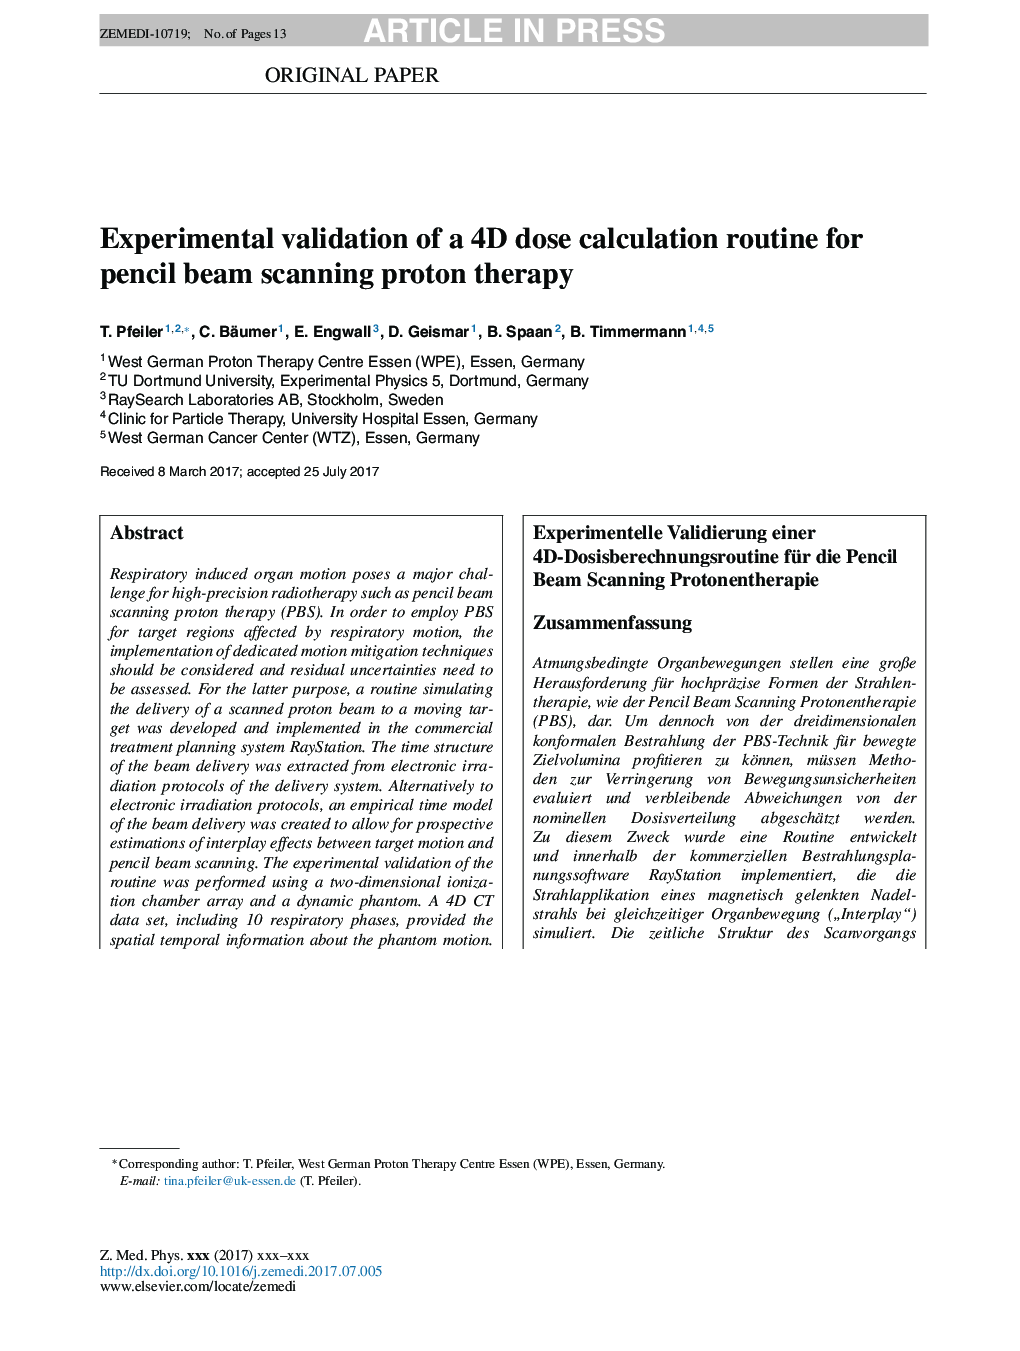 Experimental validation of a 4D dose calculation routine for pencil beam scanning proton therapy